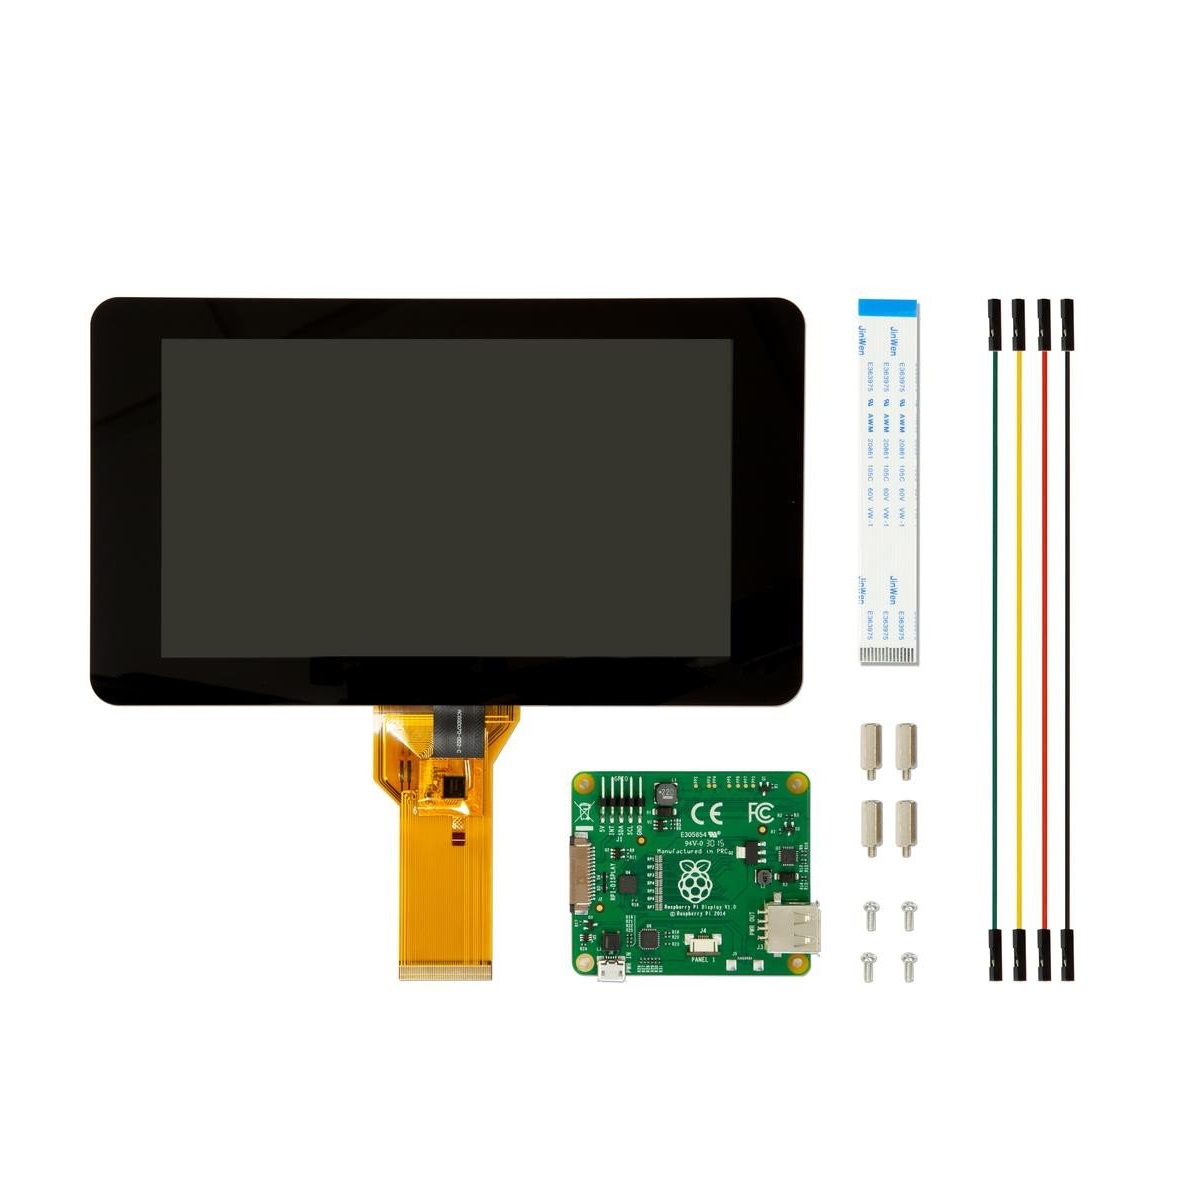 Buy Official Raspberry Pi 400 Personal Computer Online at